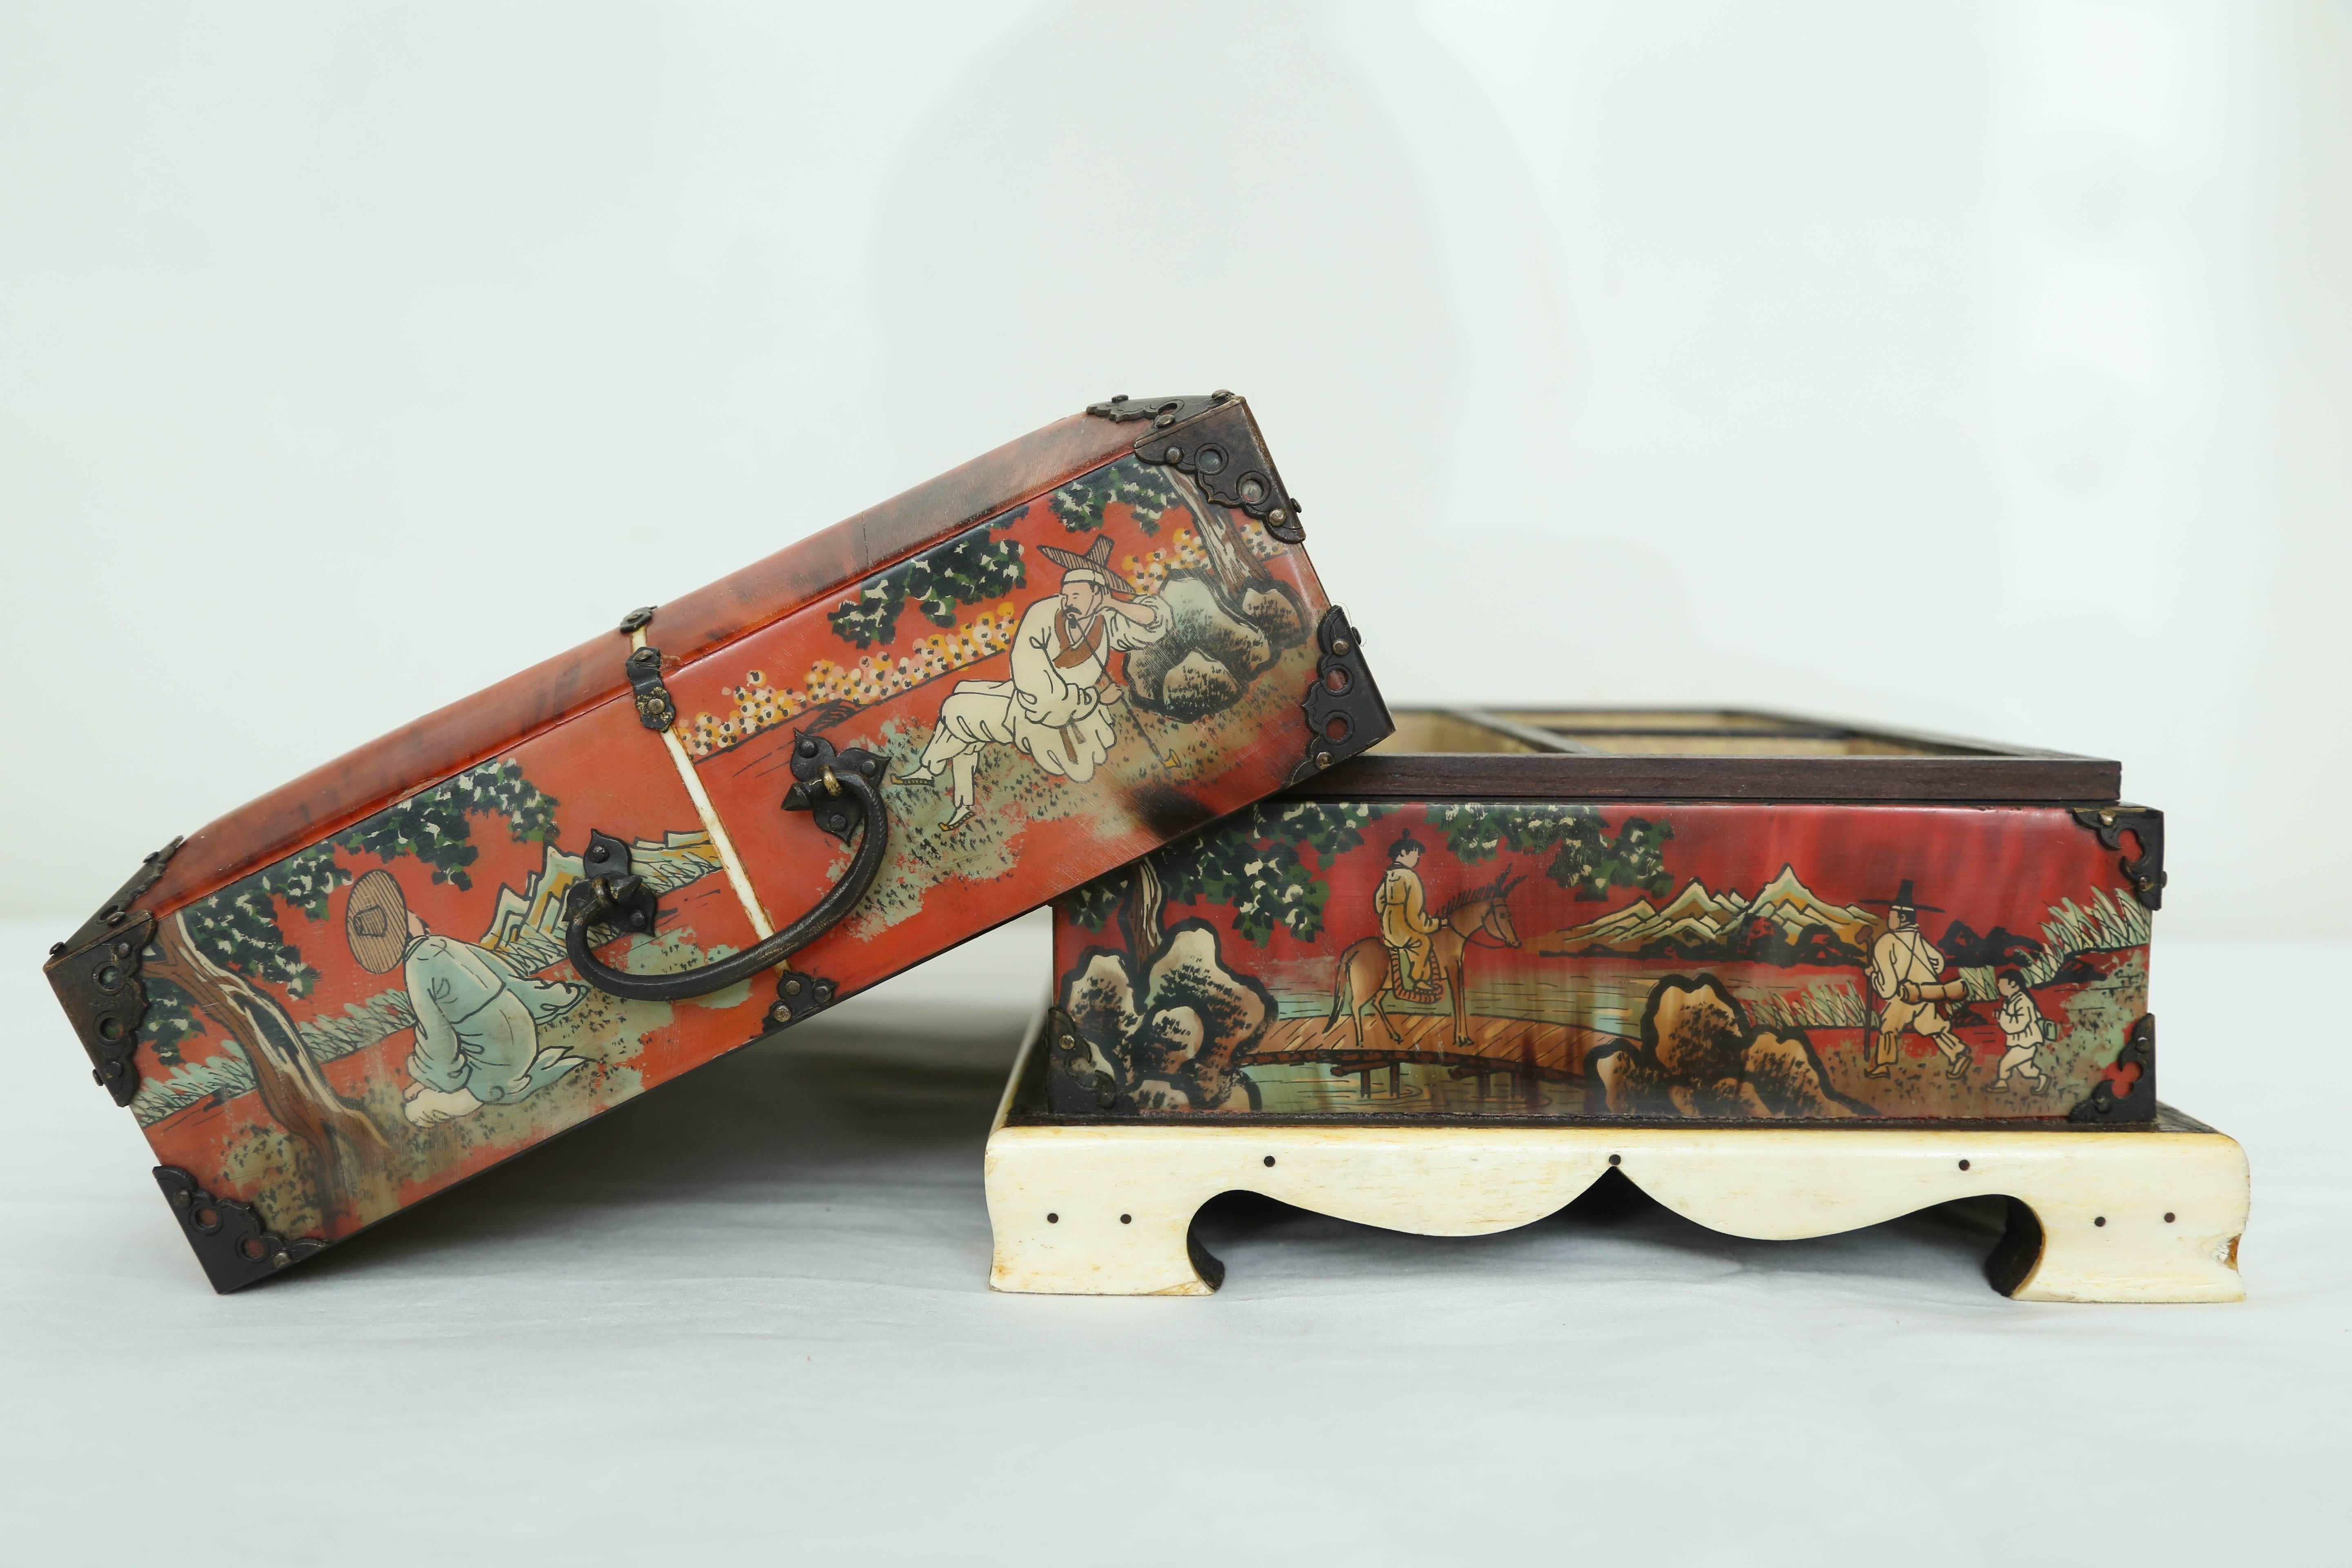 Made for the Western market with detailed paintings. Finely fashioned with quality materials.